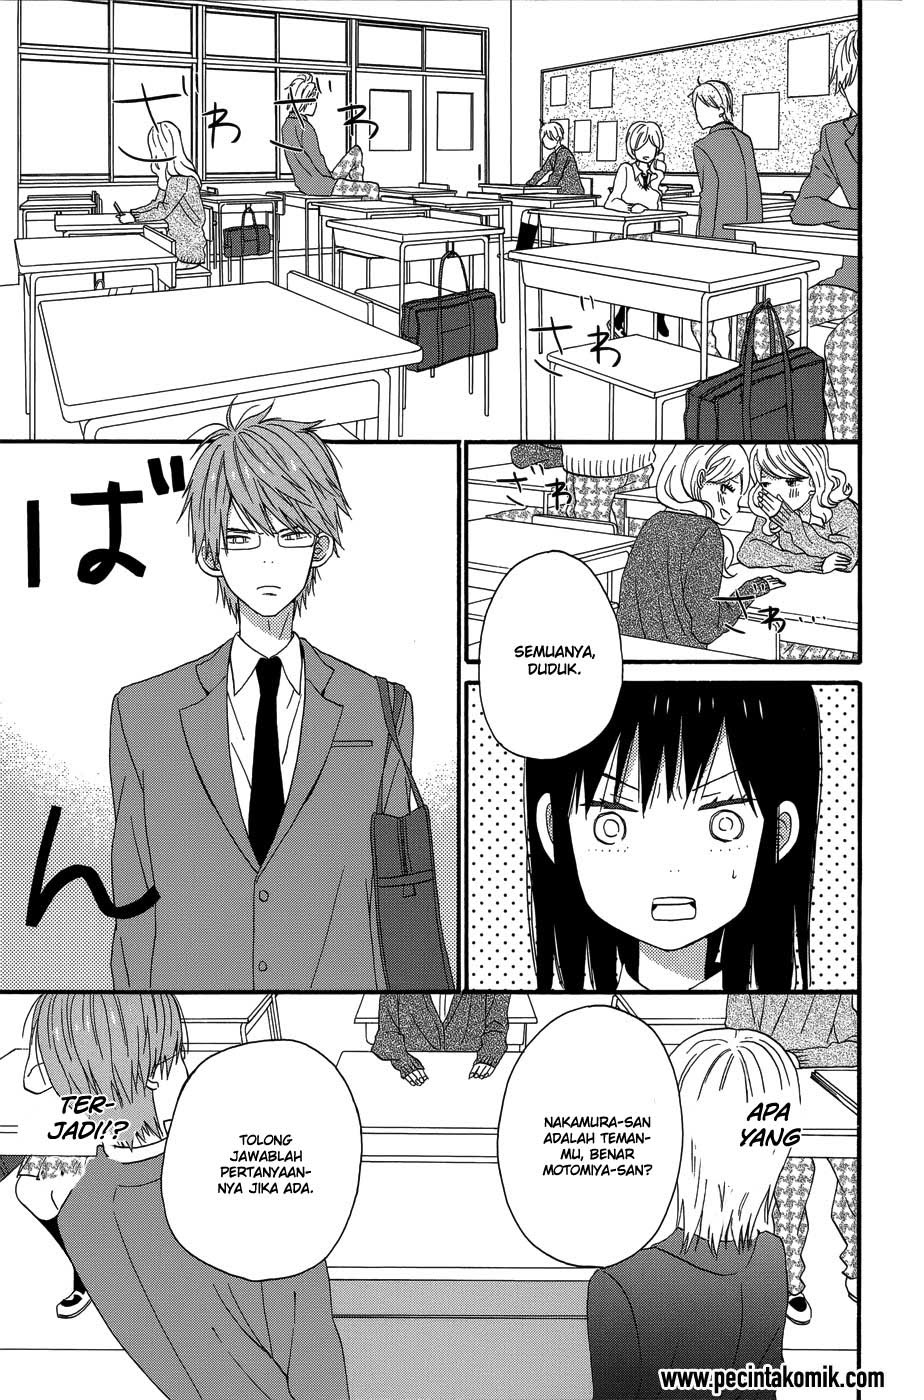 Taiyou no Ie Chapter 24